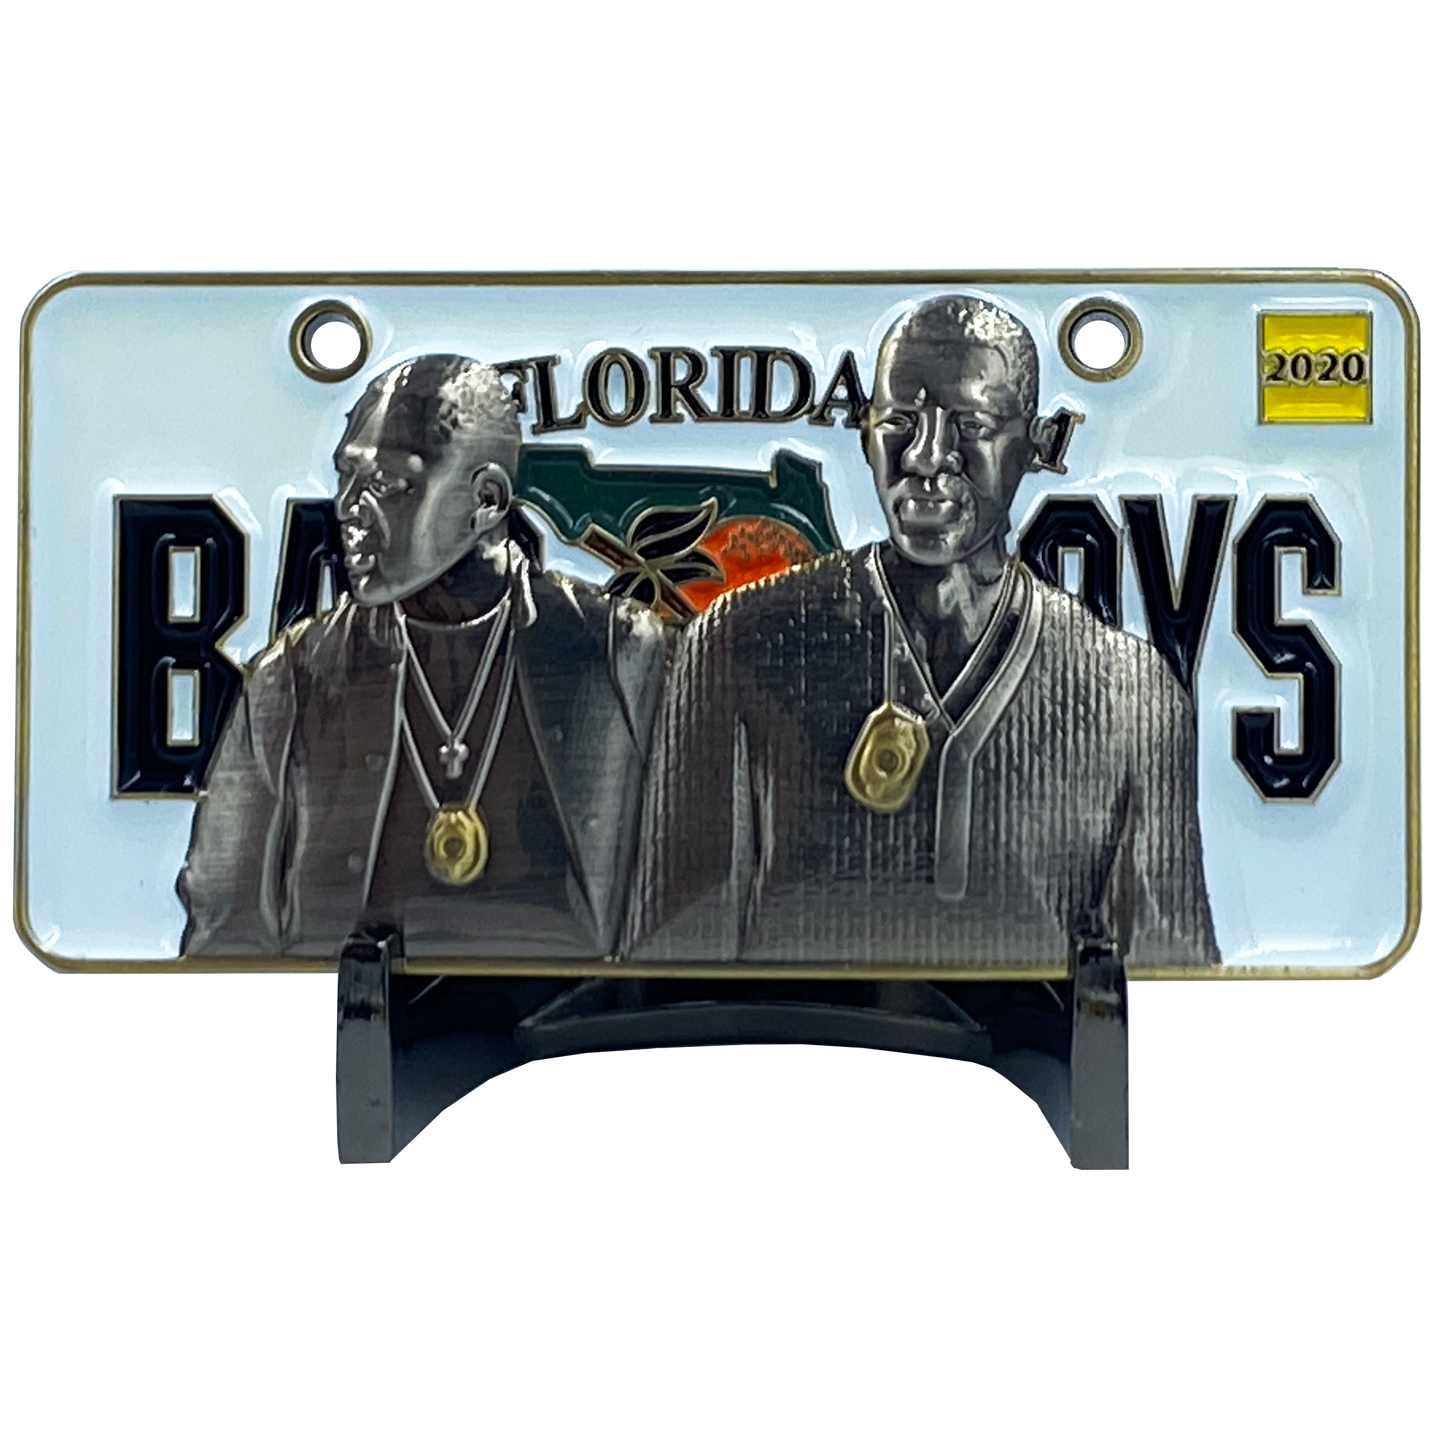 EL5-015 BAD BOYS version 2 City of Miami Police Department inspired Florida License Plate Thin Blue Line Back the Blue Challenge Coin Will Smith Martin Lawrence